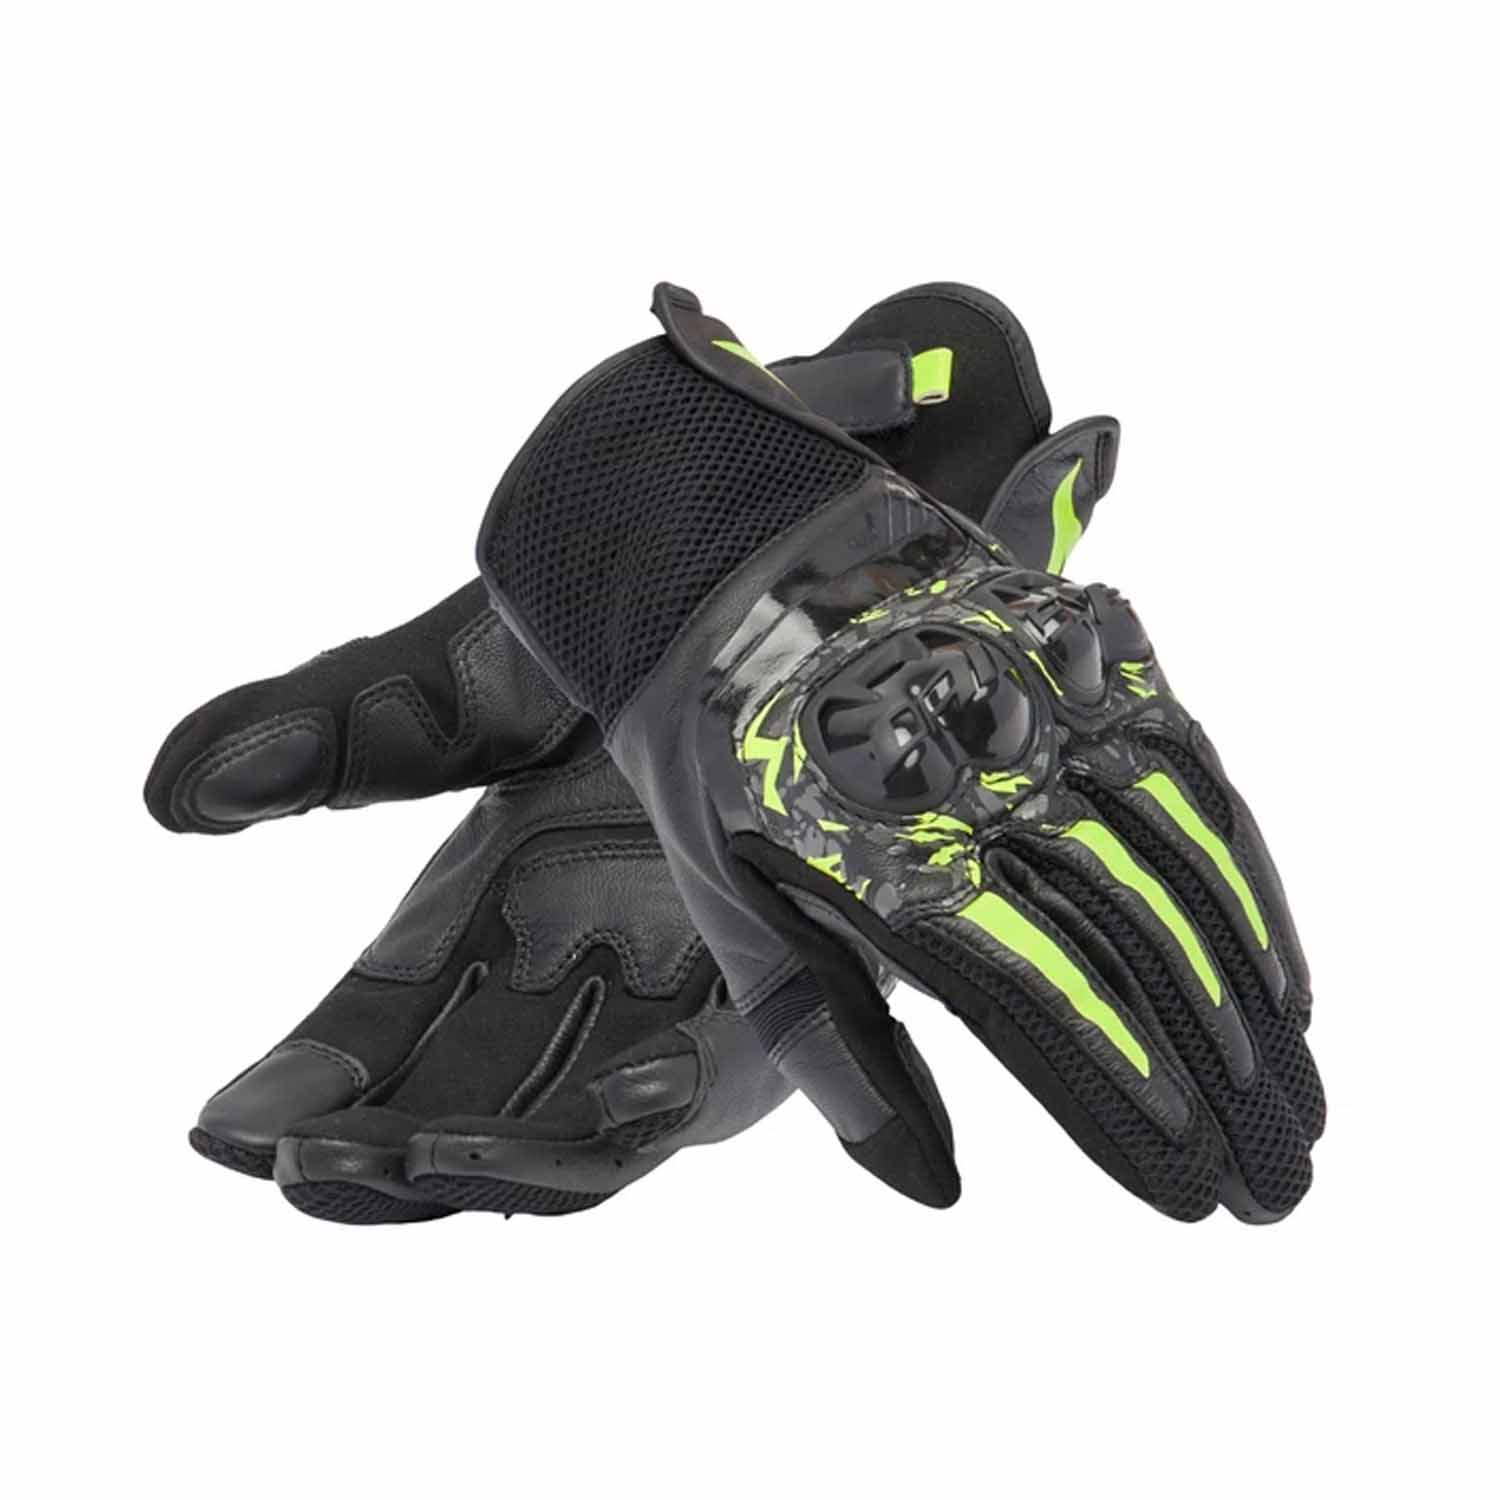 Image of Dainese MIG 3 Gloves Black Anthracite Yellow Fluo Size S ID 8051019701367